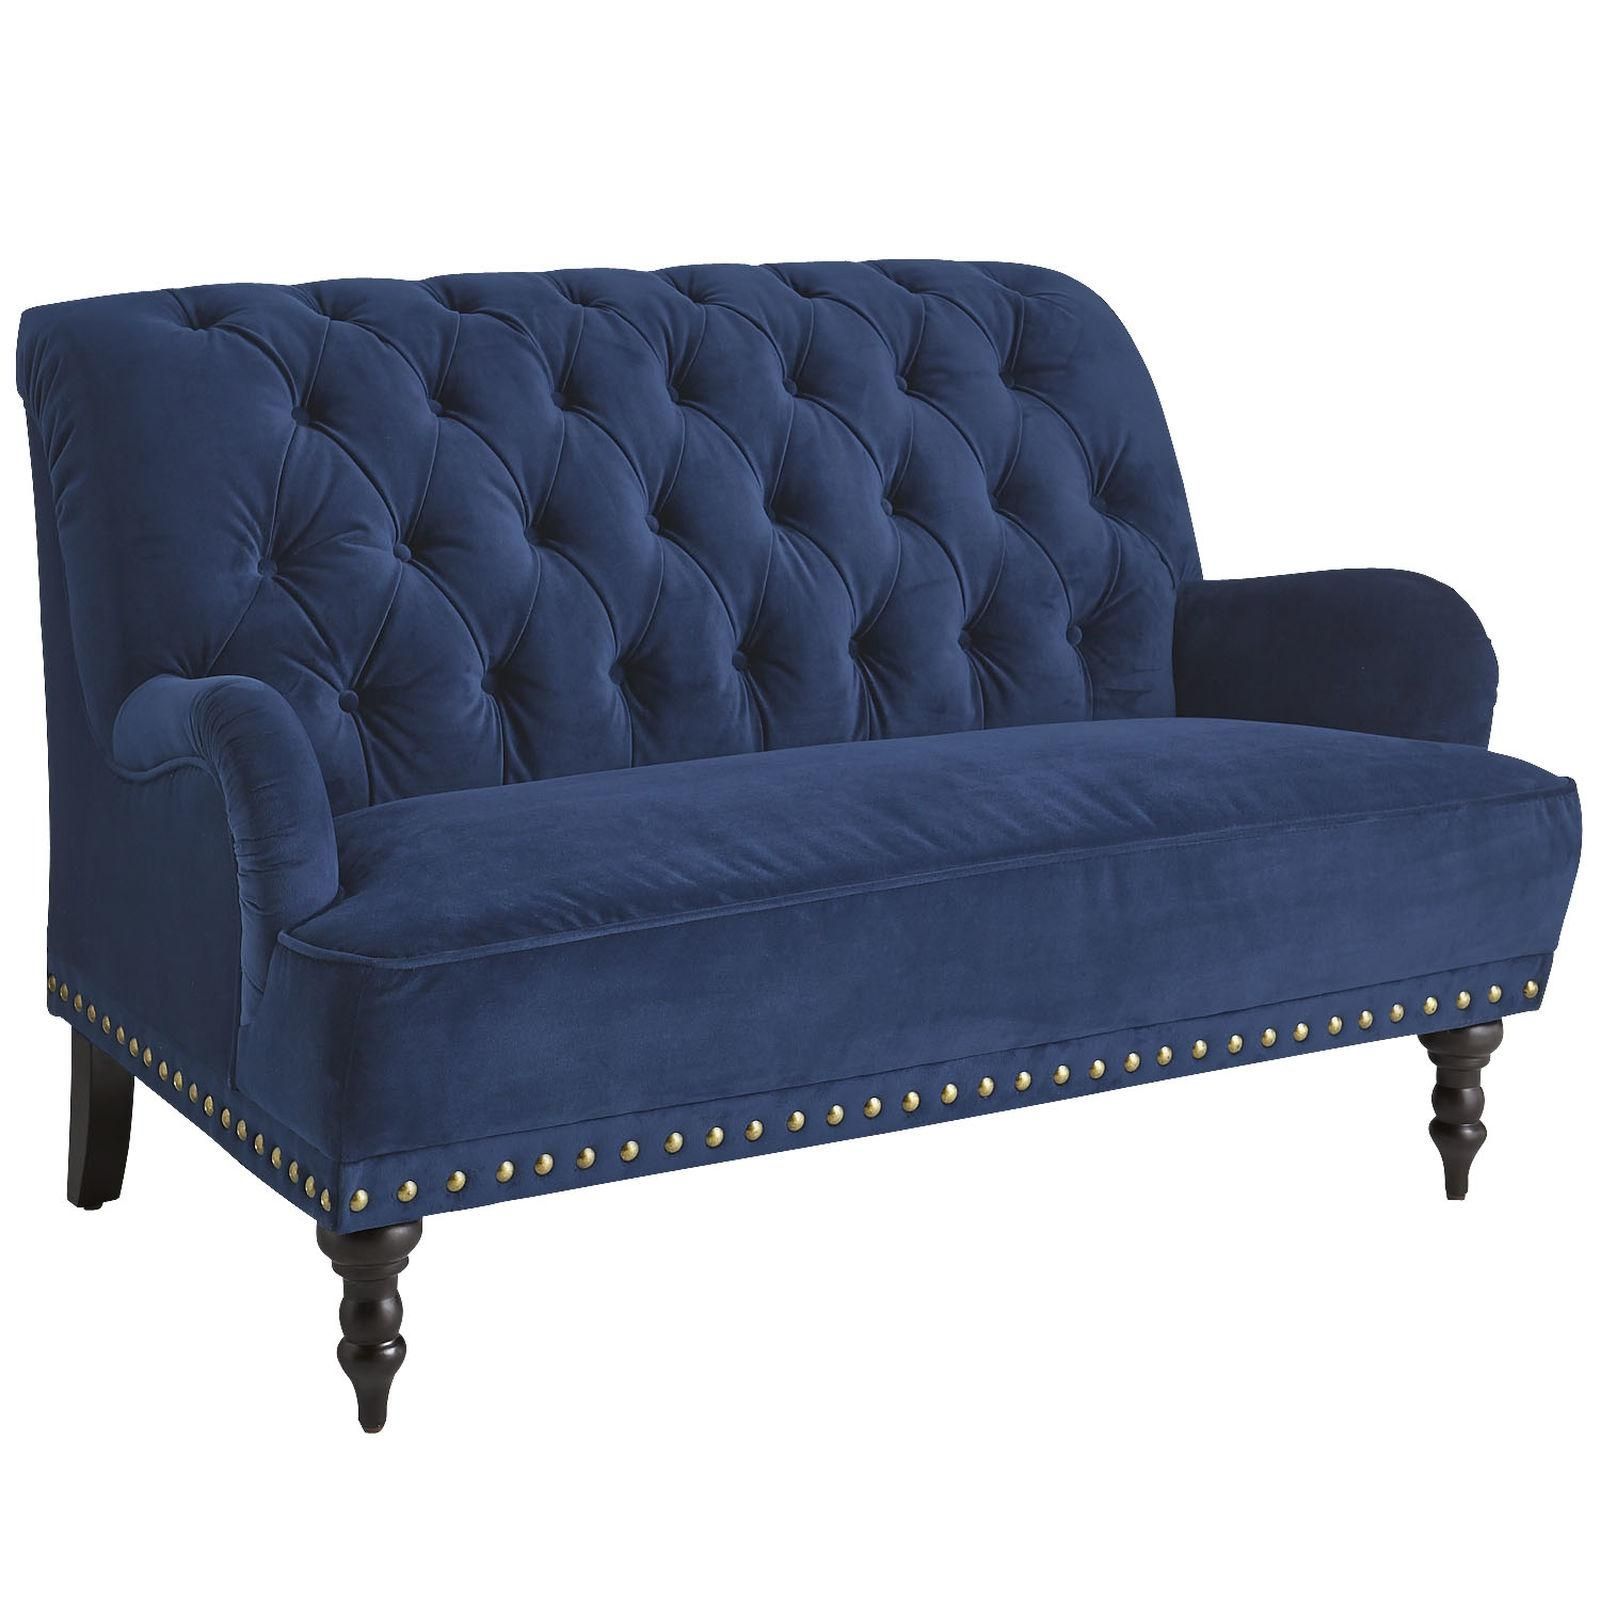 Furniture: Stunning Pier One Loveseat For Perfect Living Room Intended For Pier One Sleeper Sofas (View 10 of 20)